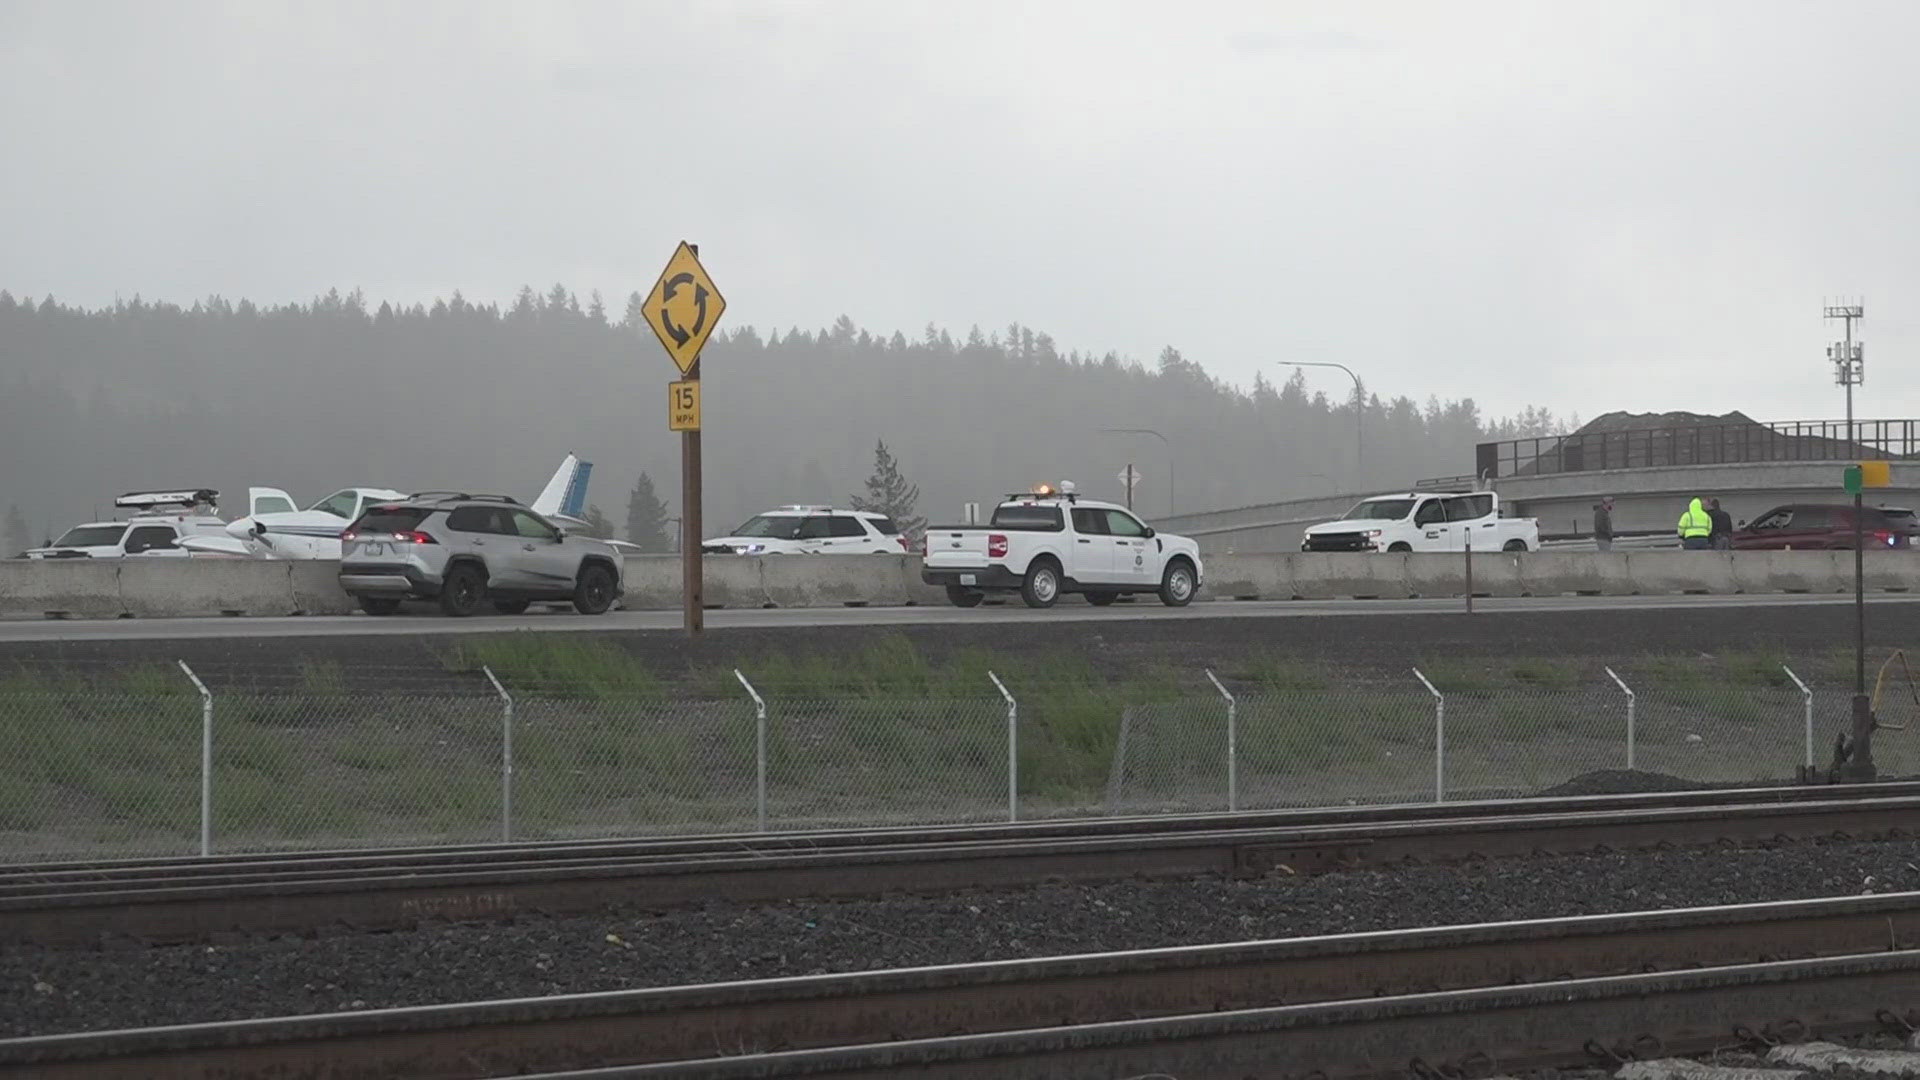 Washington State Patrol said roads are fully opened three hours after the initial report.